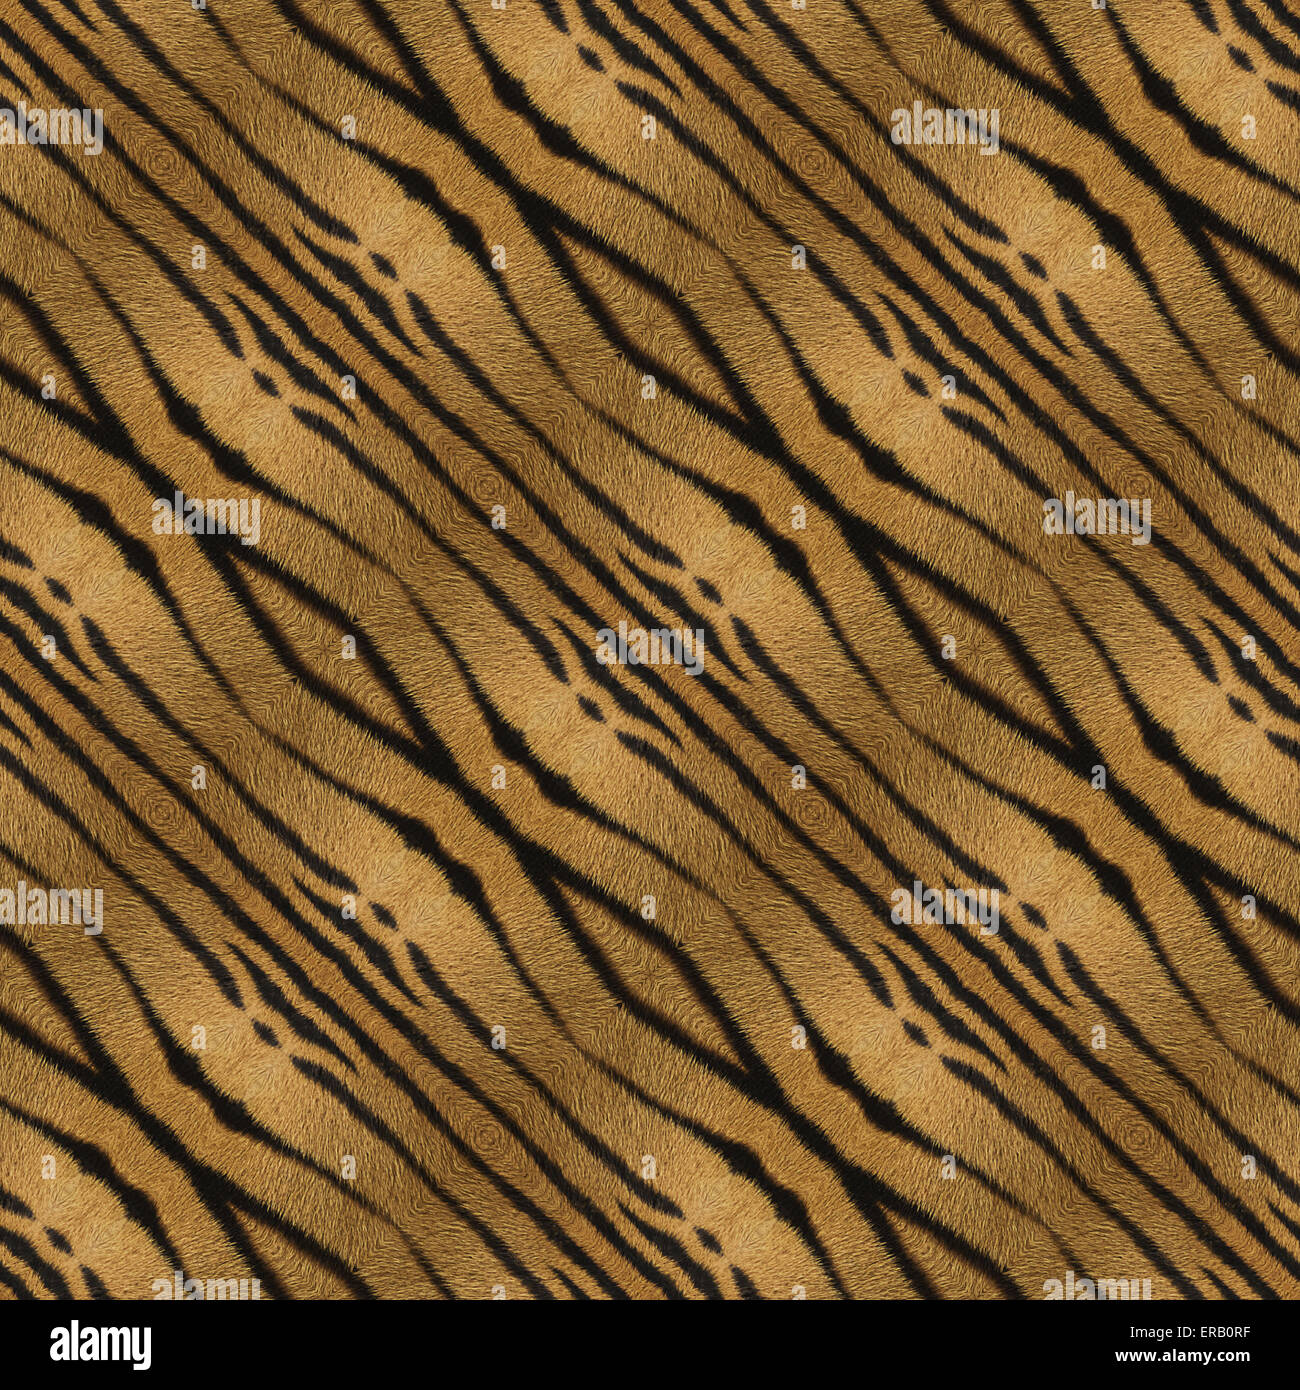 Abstract illustration of background derived from a tiger pattern. Stock Photo